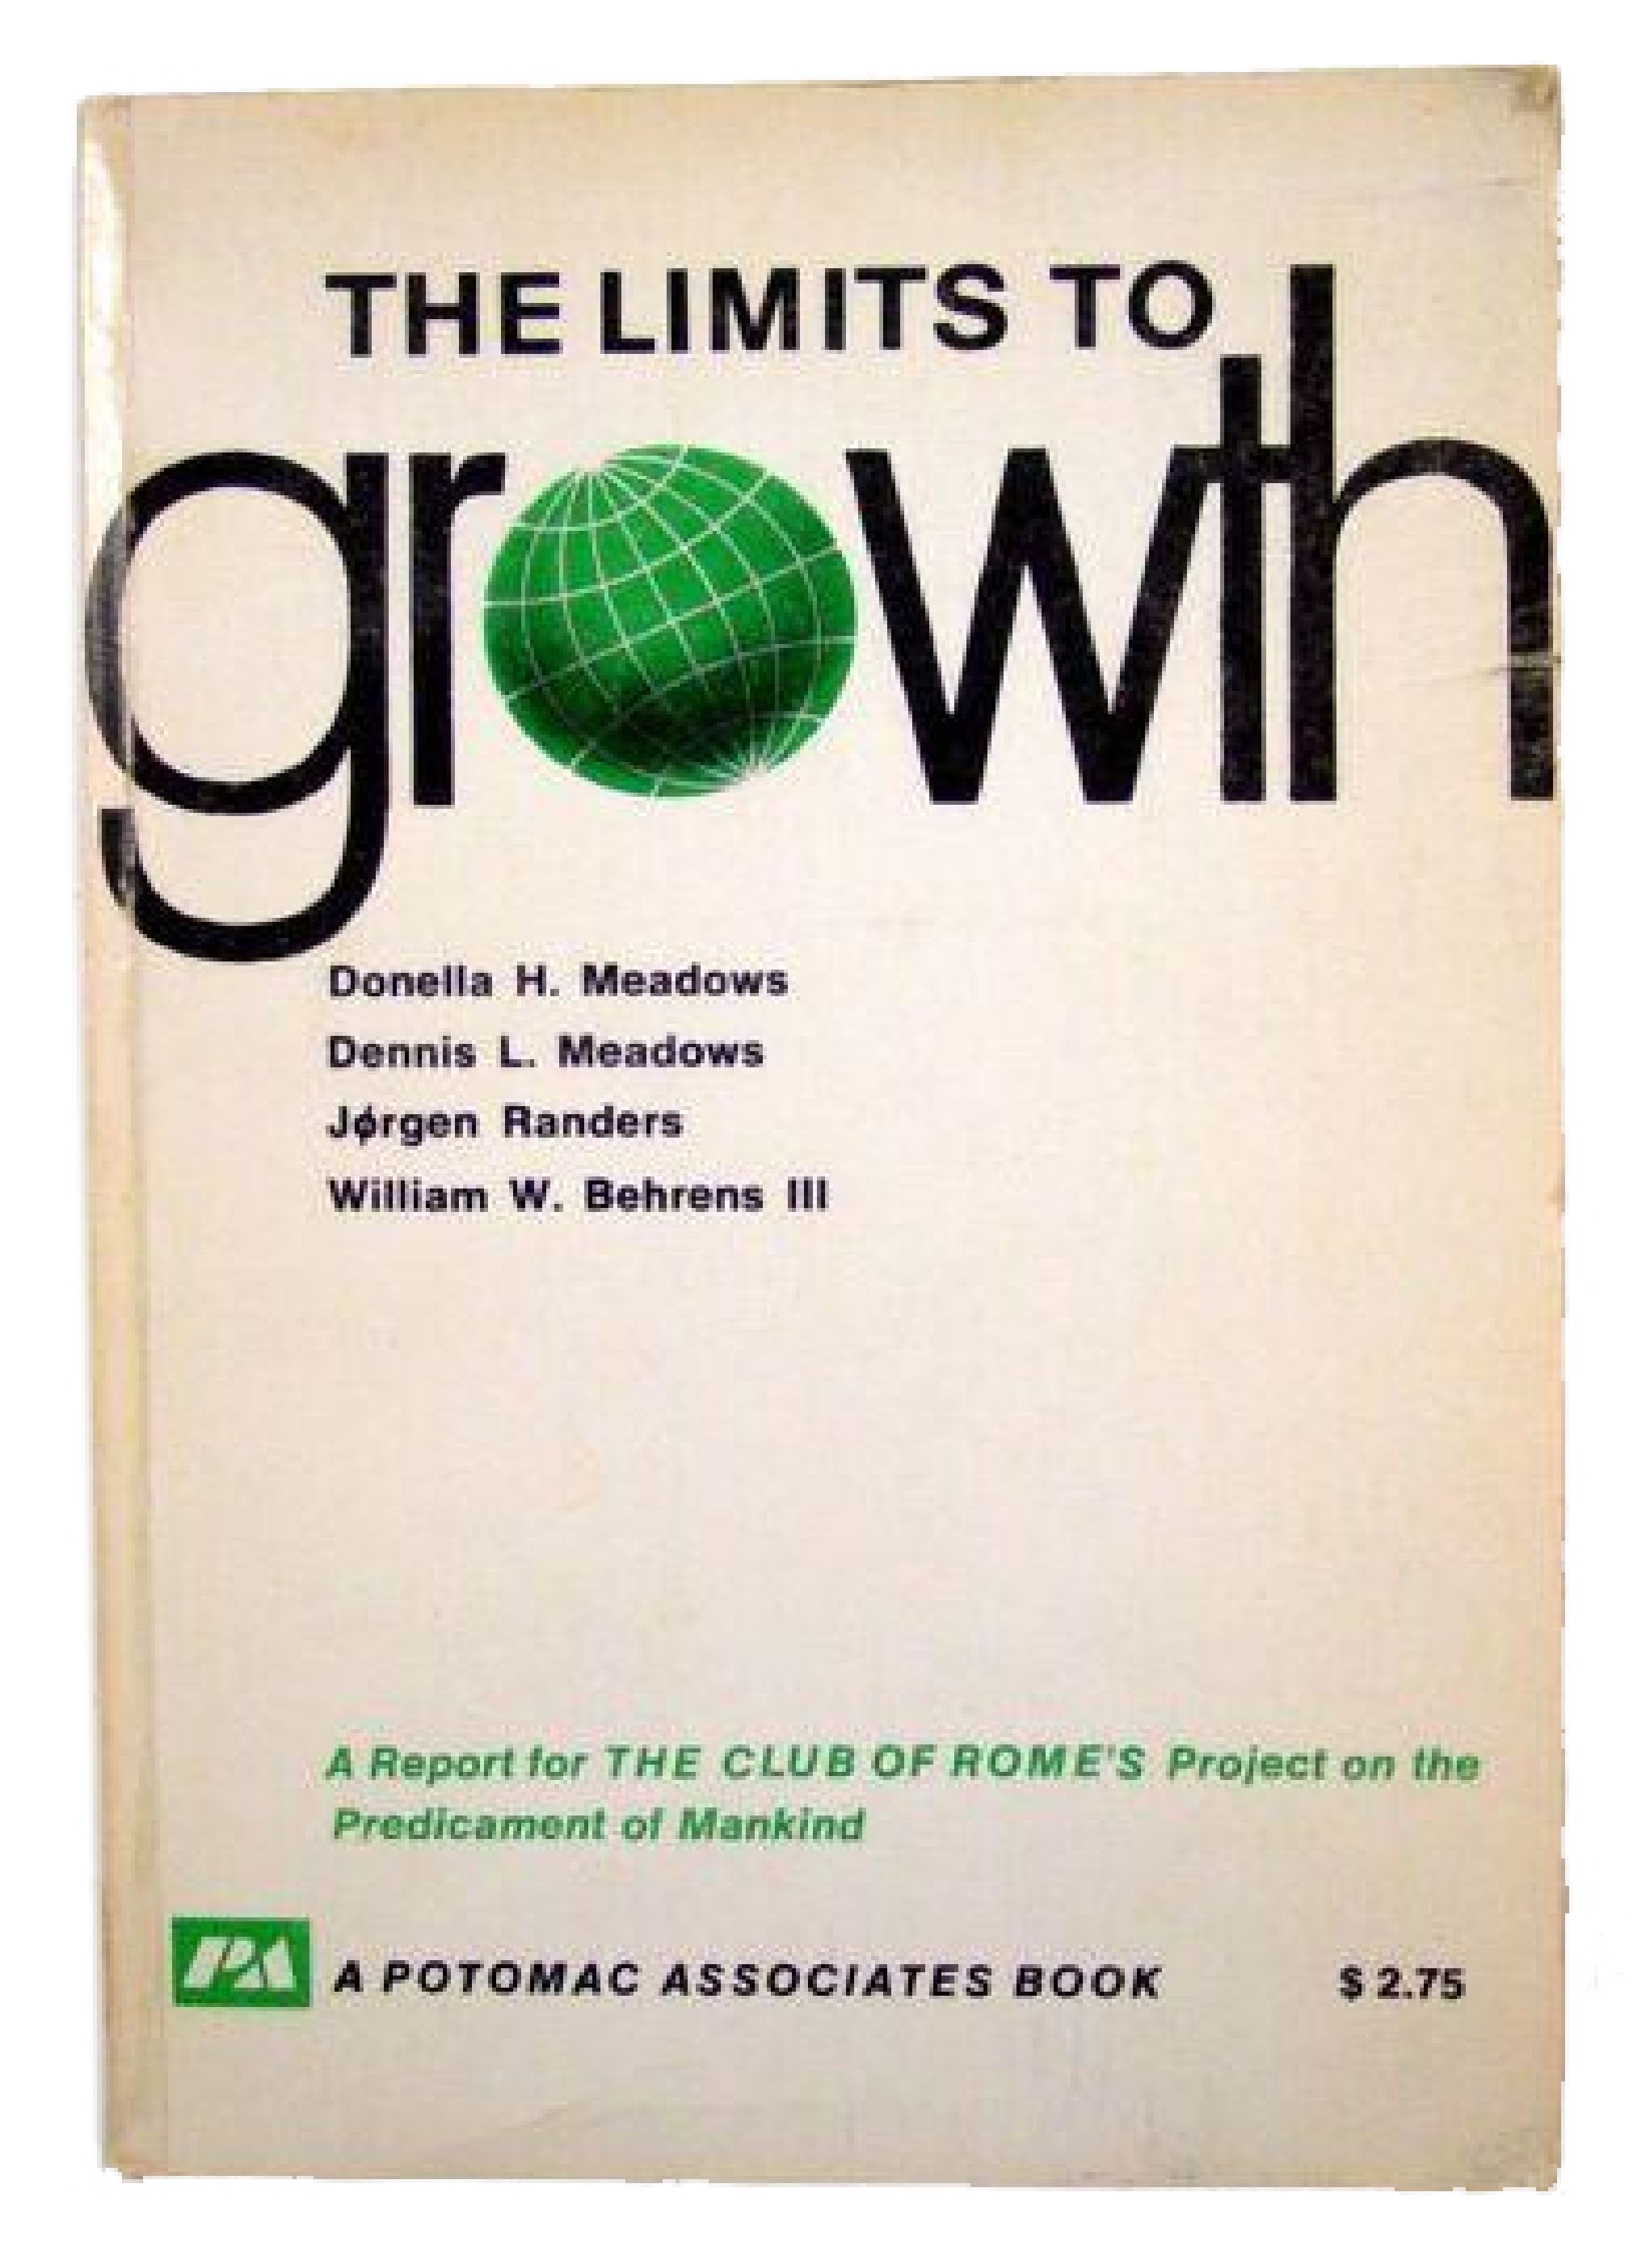 Donella Meadows, lead author of 'The Limits to Growth' encouraged people to go dancing with systems